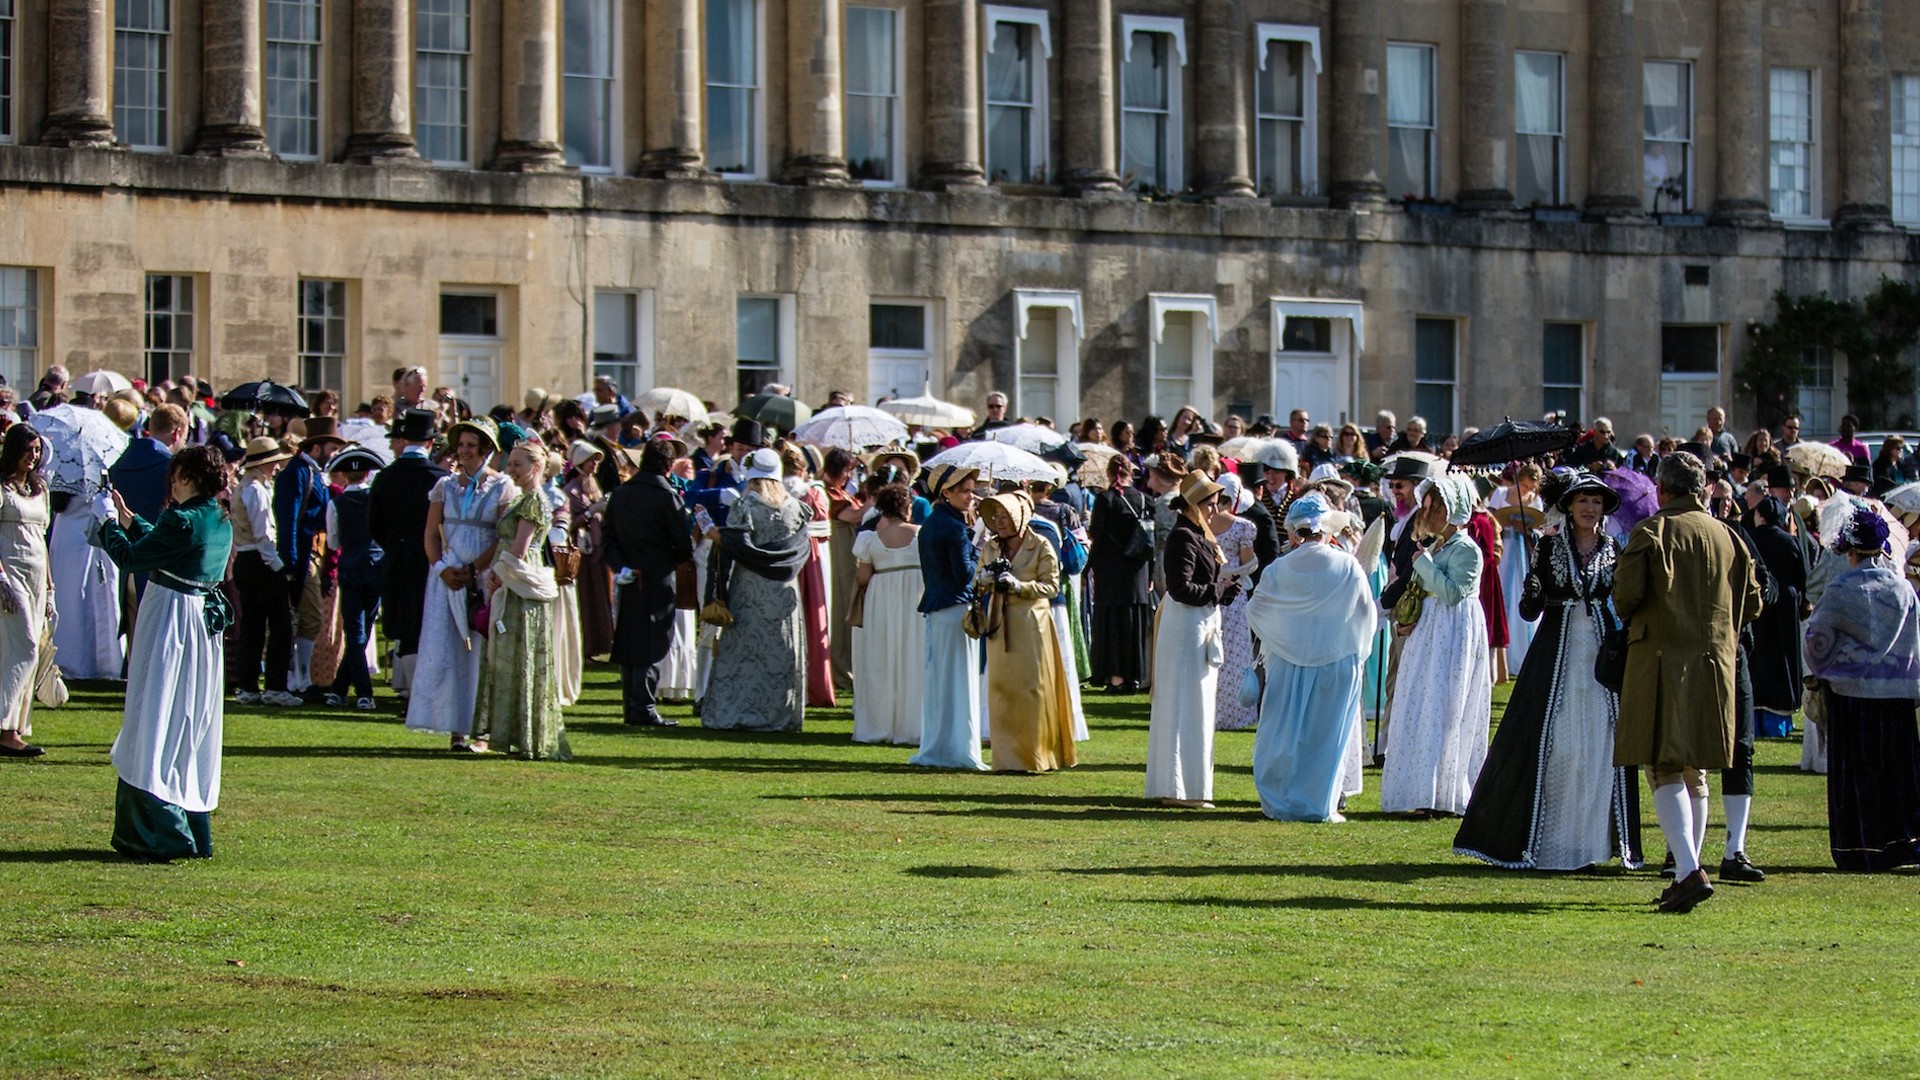 Jane Austen fans, dressed in period costume, on Royal Crescent